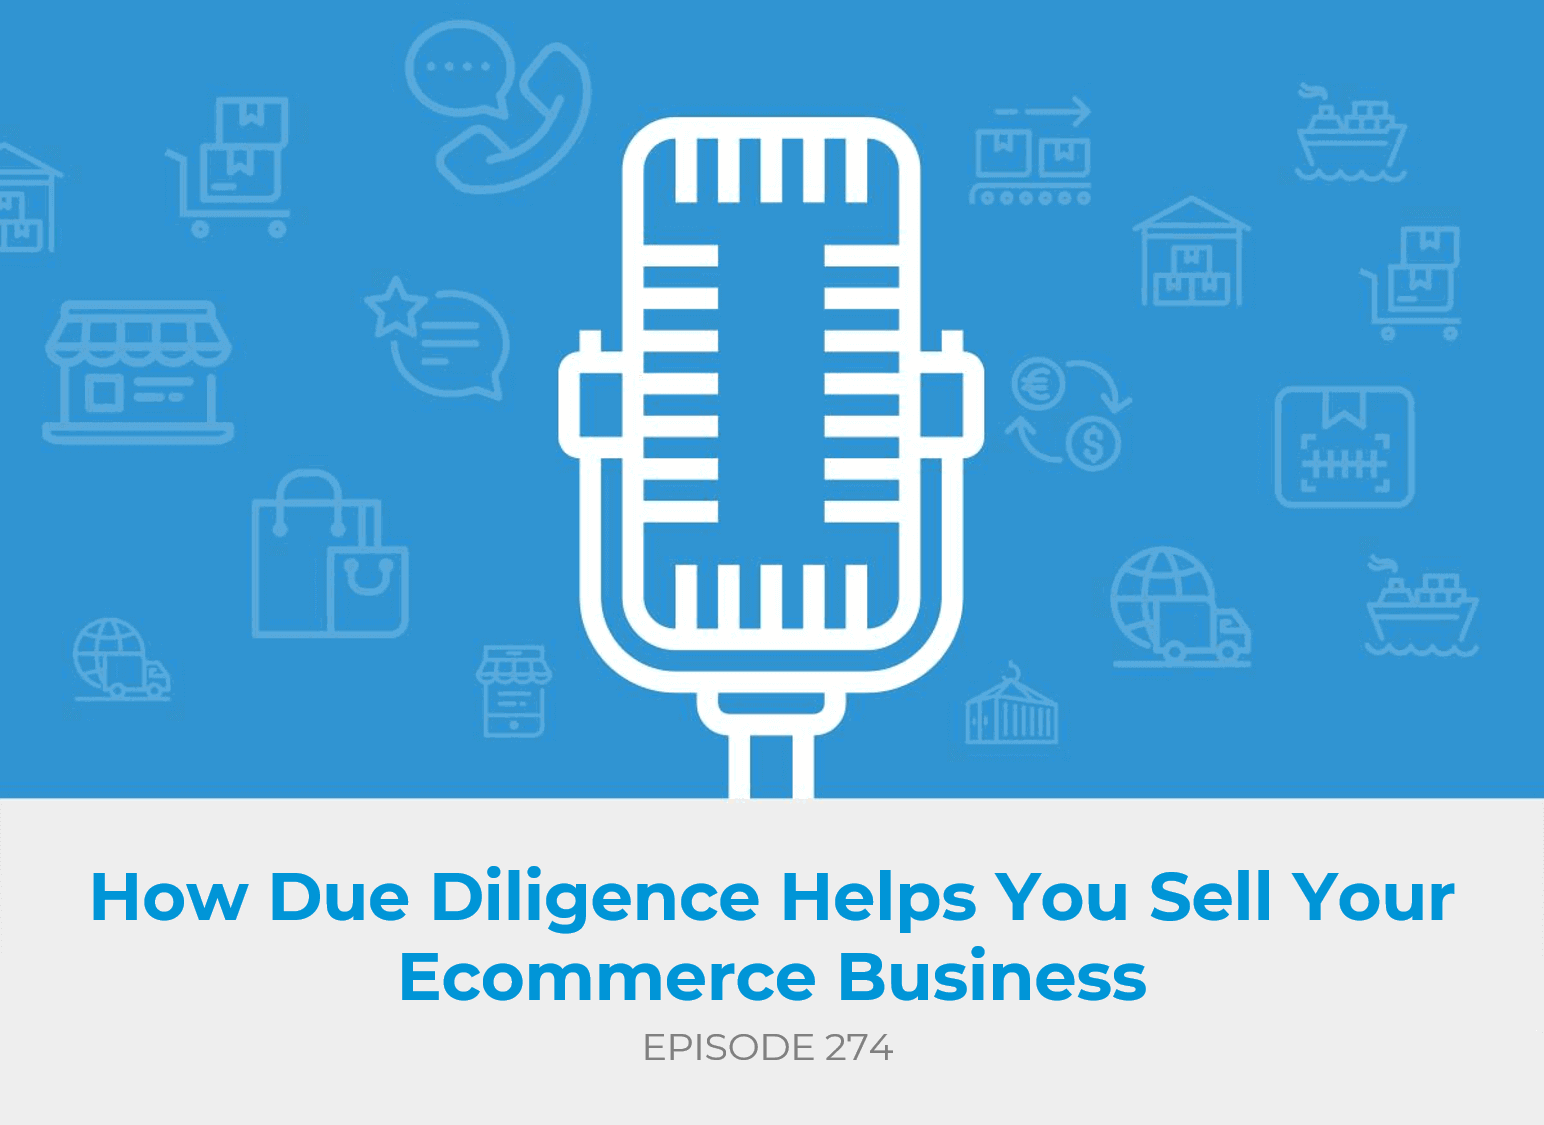 How Due Diligence Helps You Sell Your Ecommerce Business